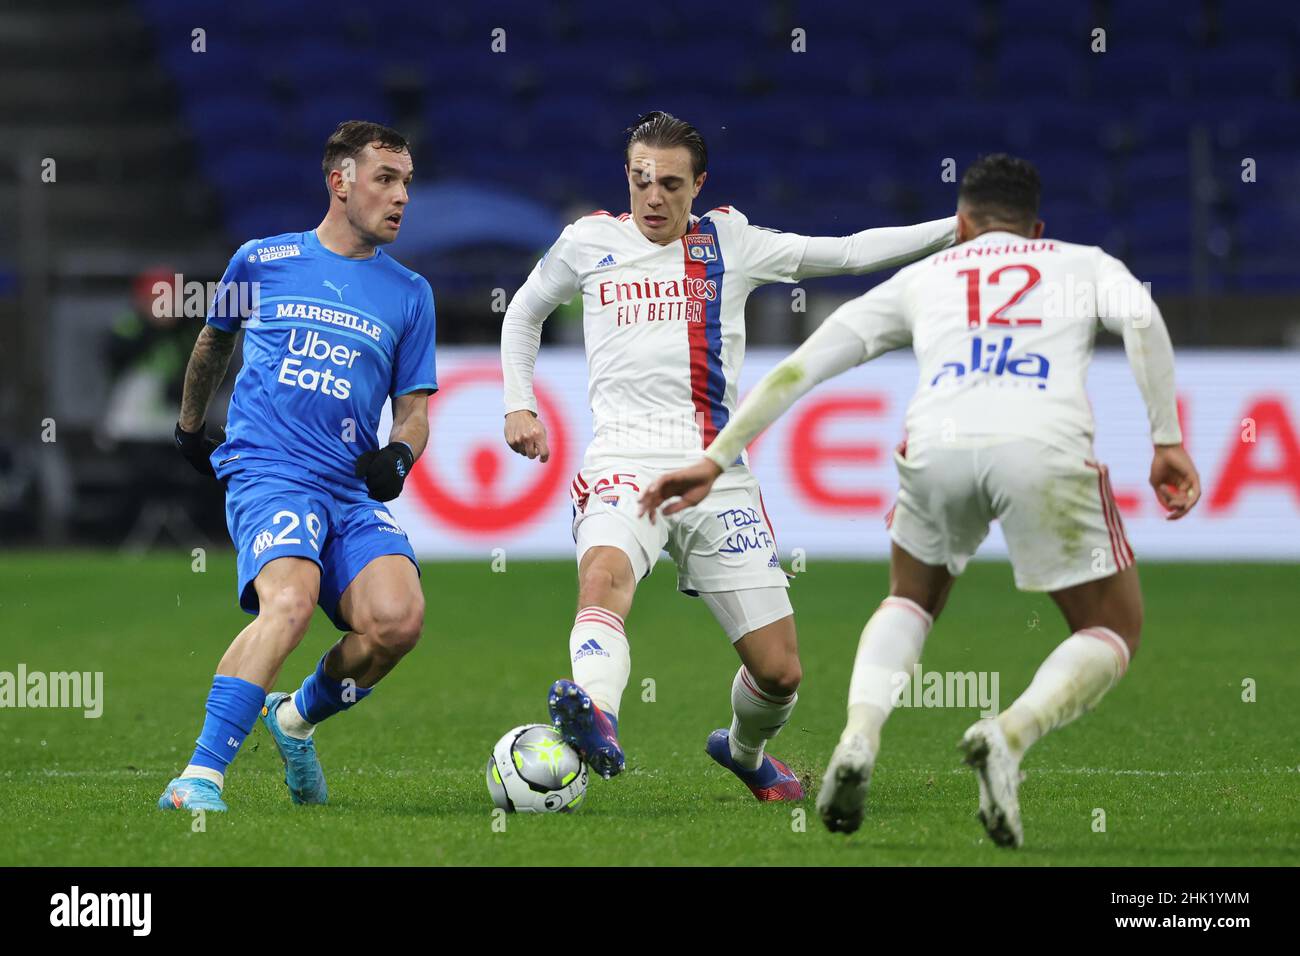 Lyon, France. 1st Feb, 2022. Henrique of Lyon looks on as team mate Maxence Caqueret blocks a pass by Pol Lirola of Olympique De Marseille during the Uber Eats Ligue 1 match at the Groupama Stadium, Lyon. Picture credit should read: Jonathan Moscrop/Sportimage Credit: Sportimage/Alamy Live News Stock Photo